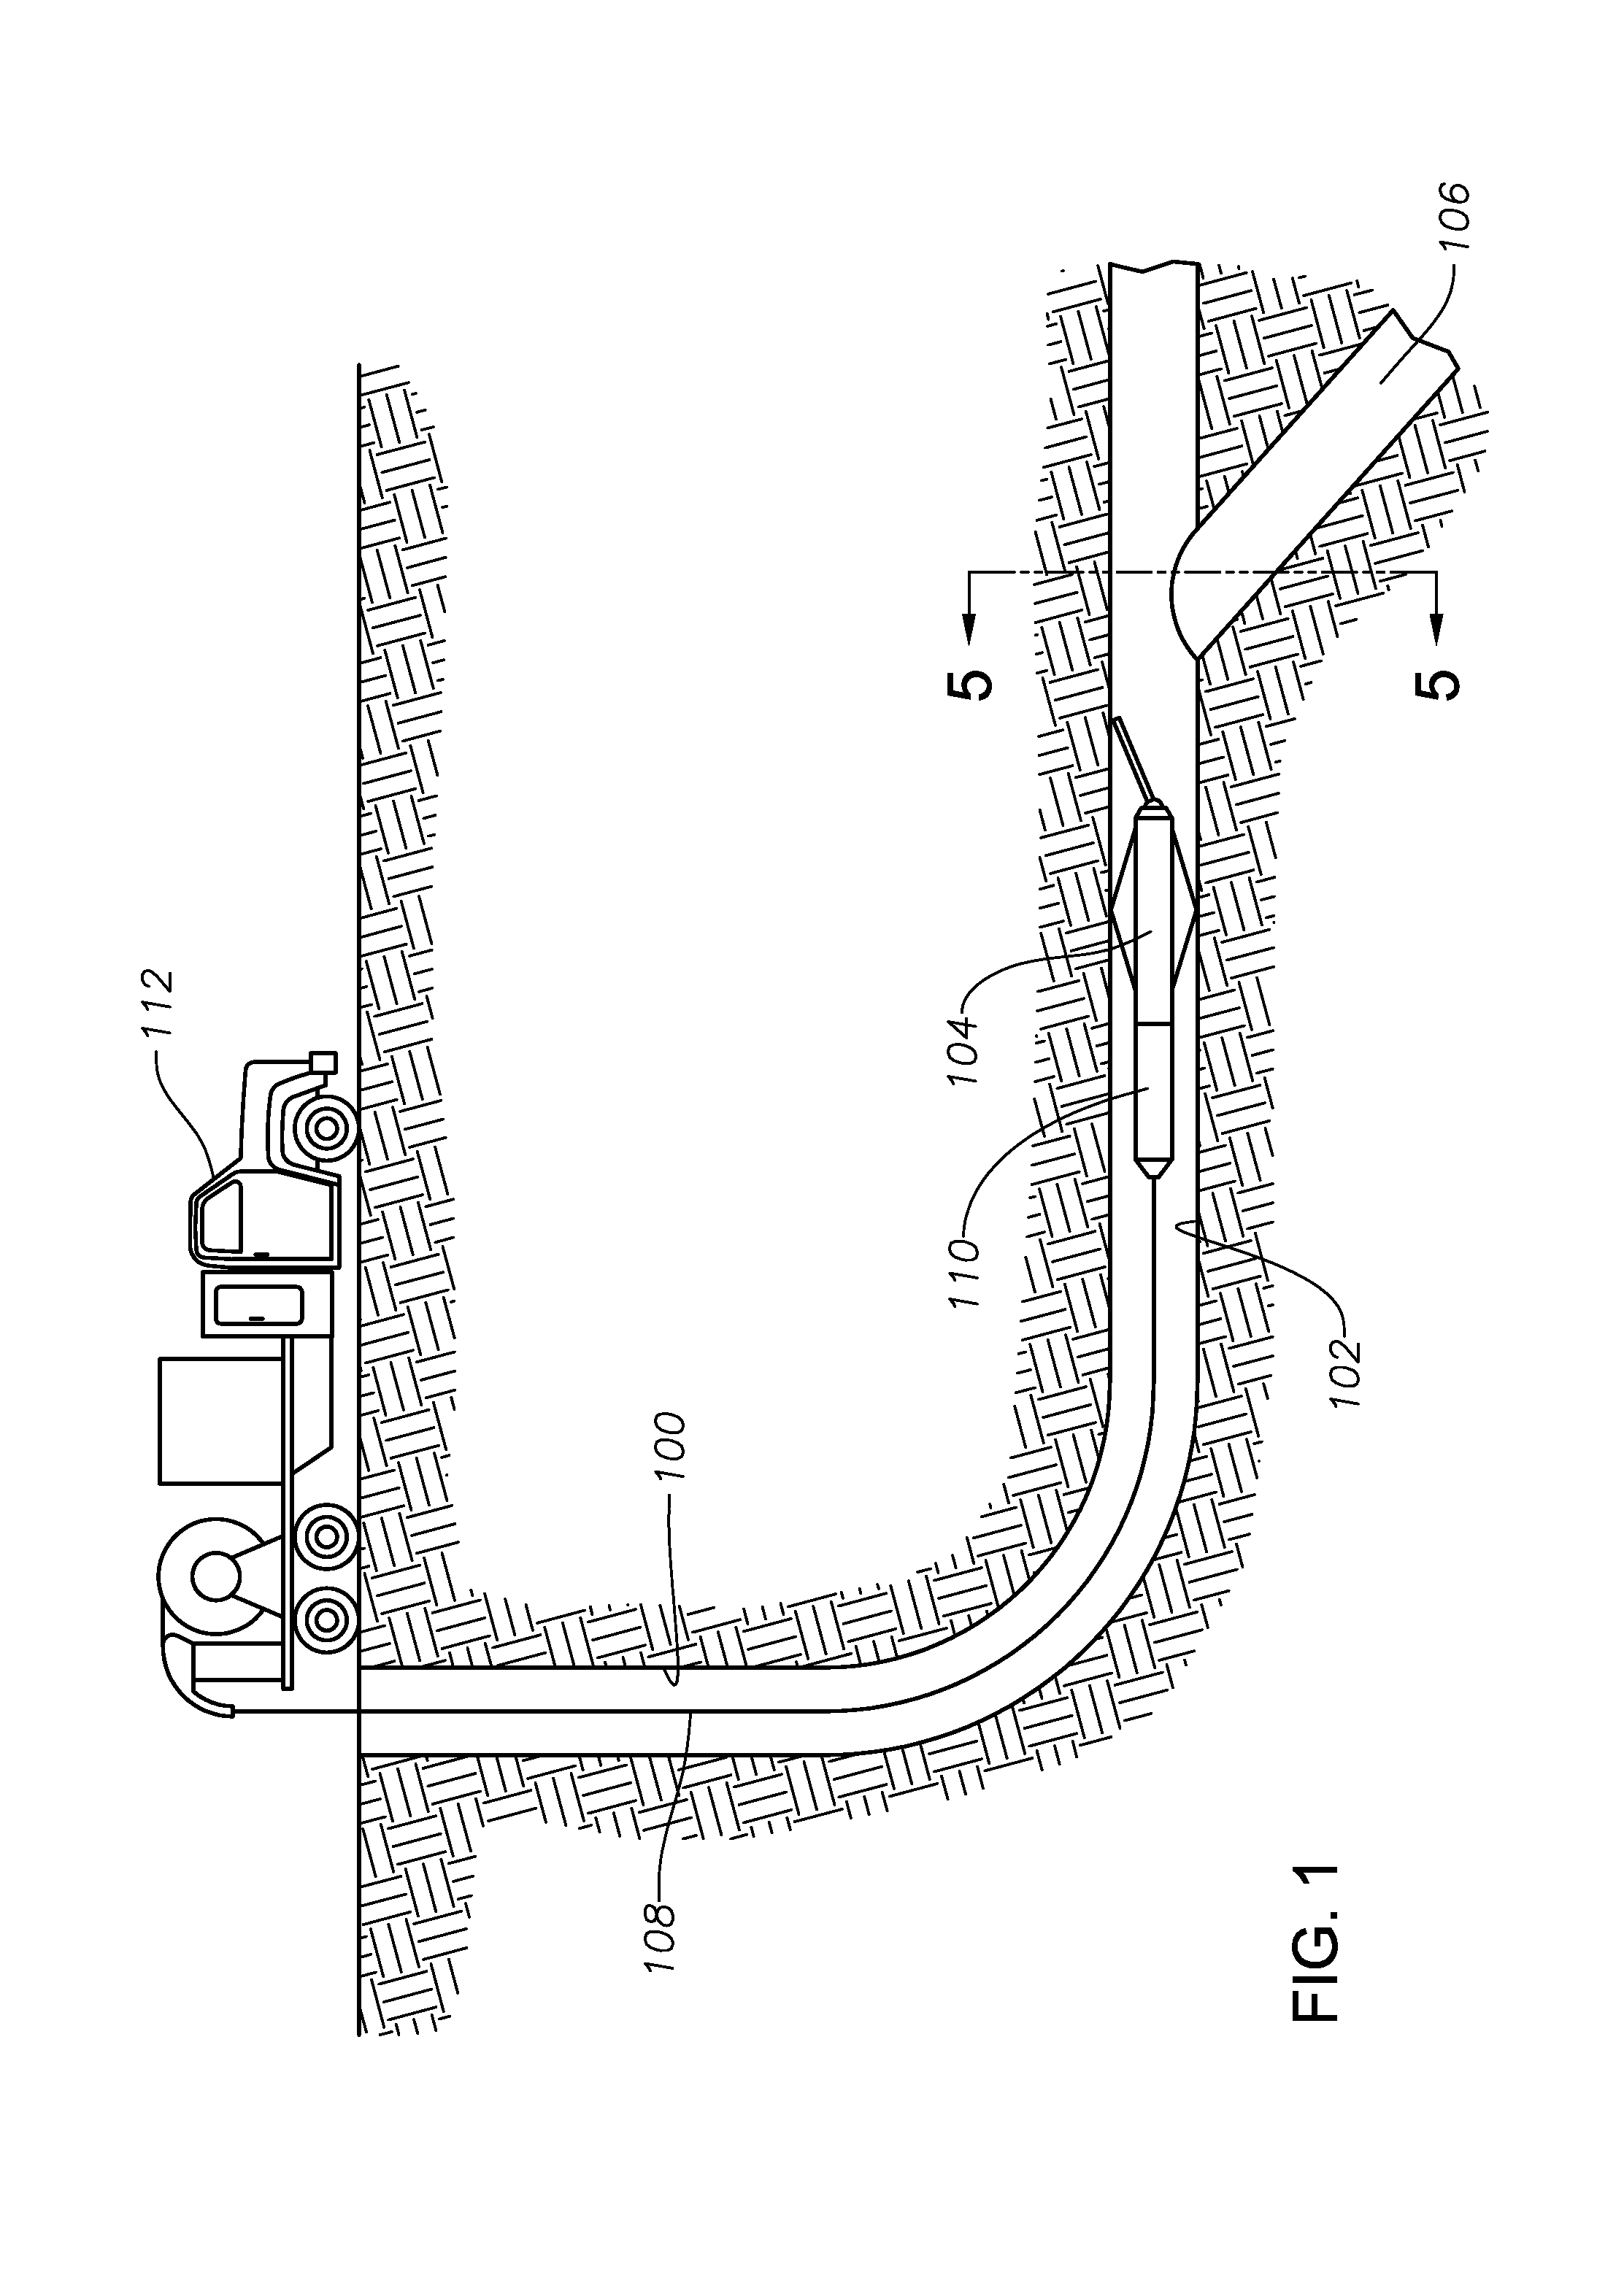 Caliper steerable tool for lateral sensing and accessing